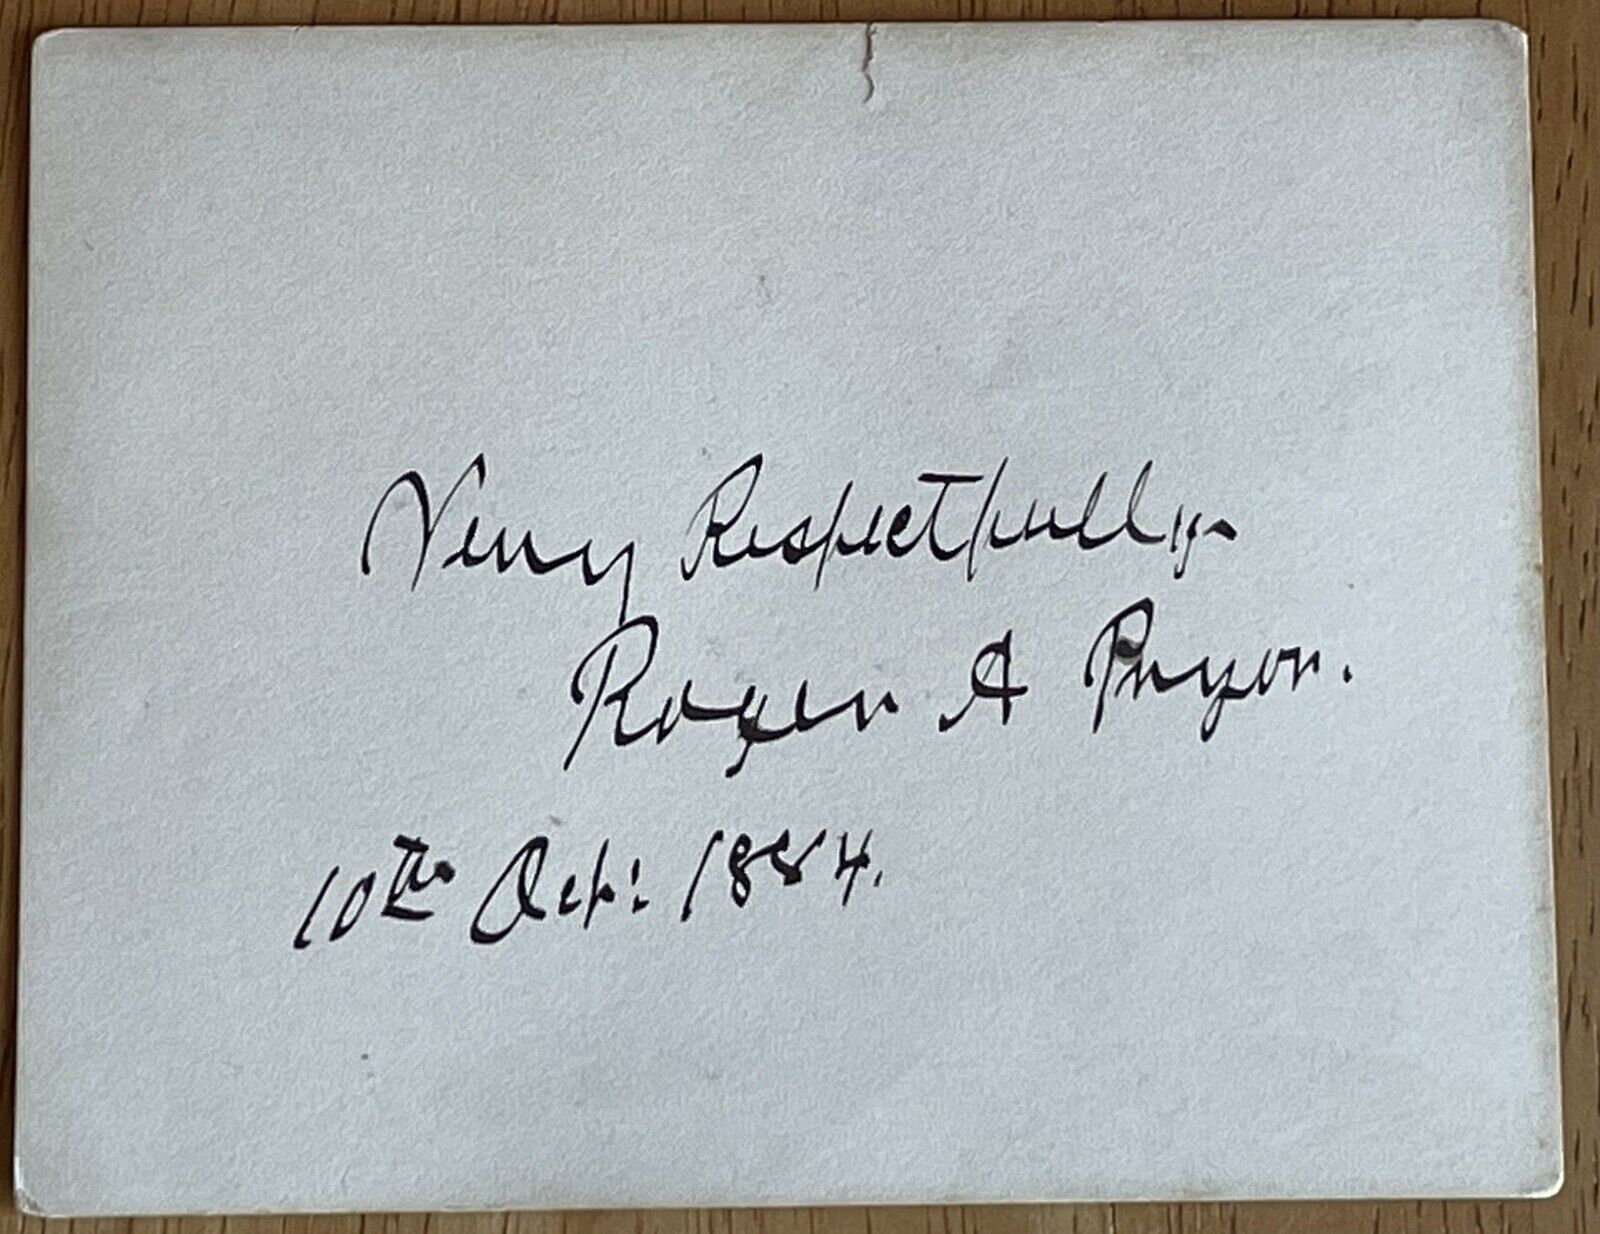 Confederate General Roger A. Pryor Large Autograph Card